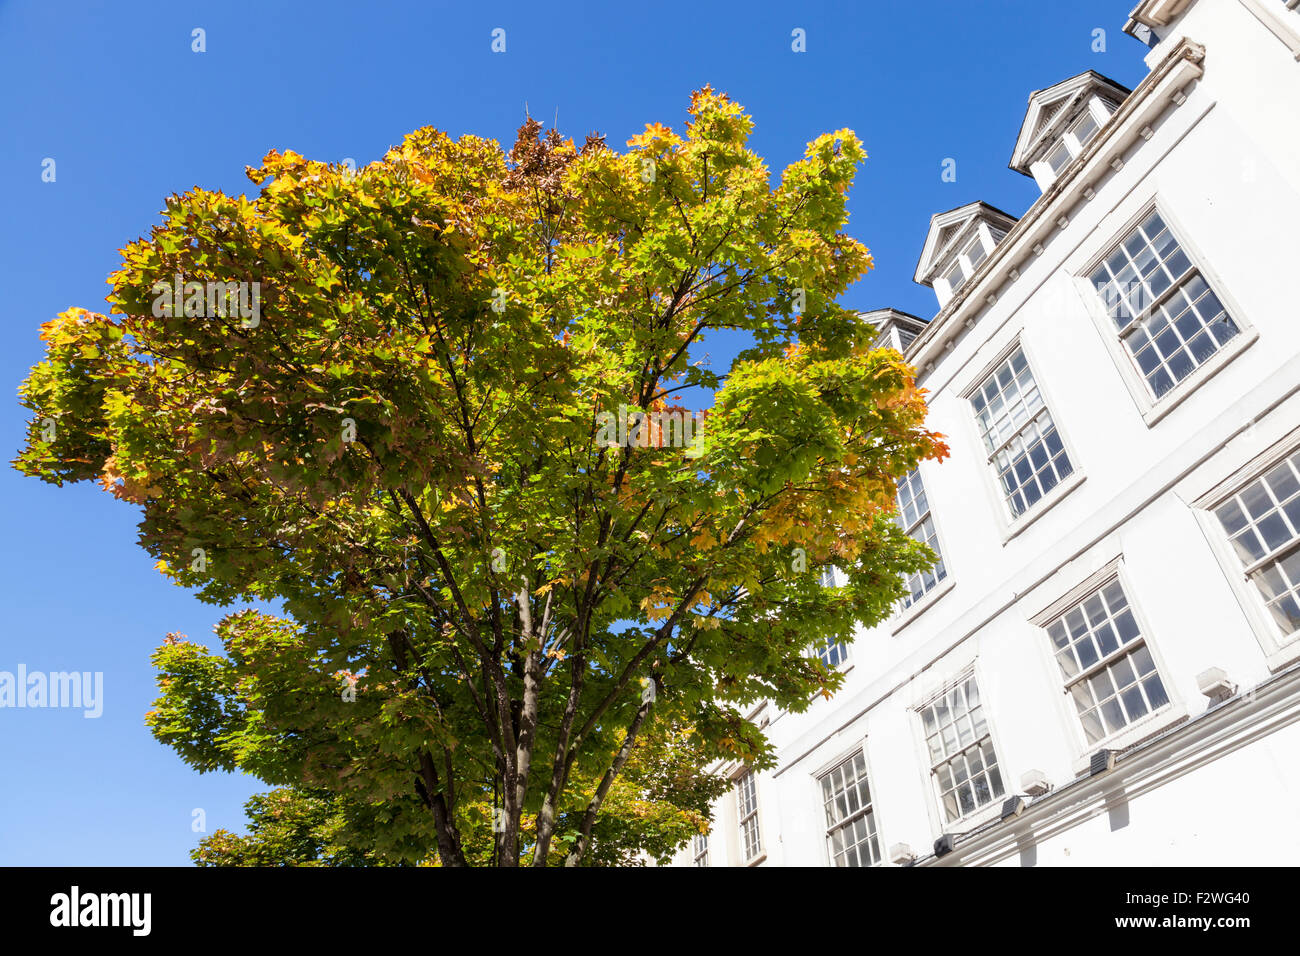 Tree at the start of Autumn with a building in the background, Nottingham, England, UK Stock Photo